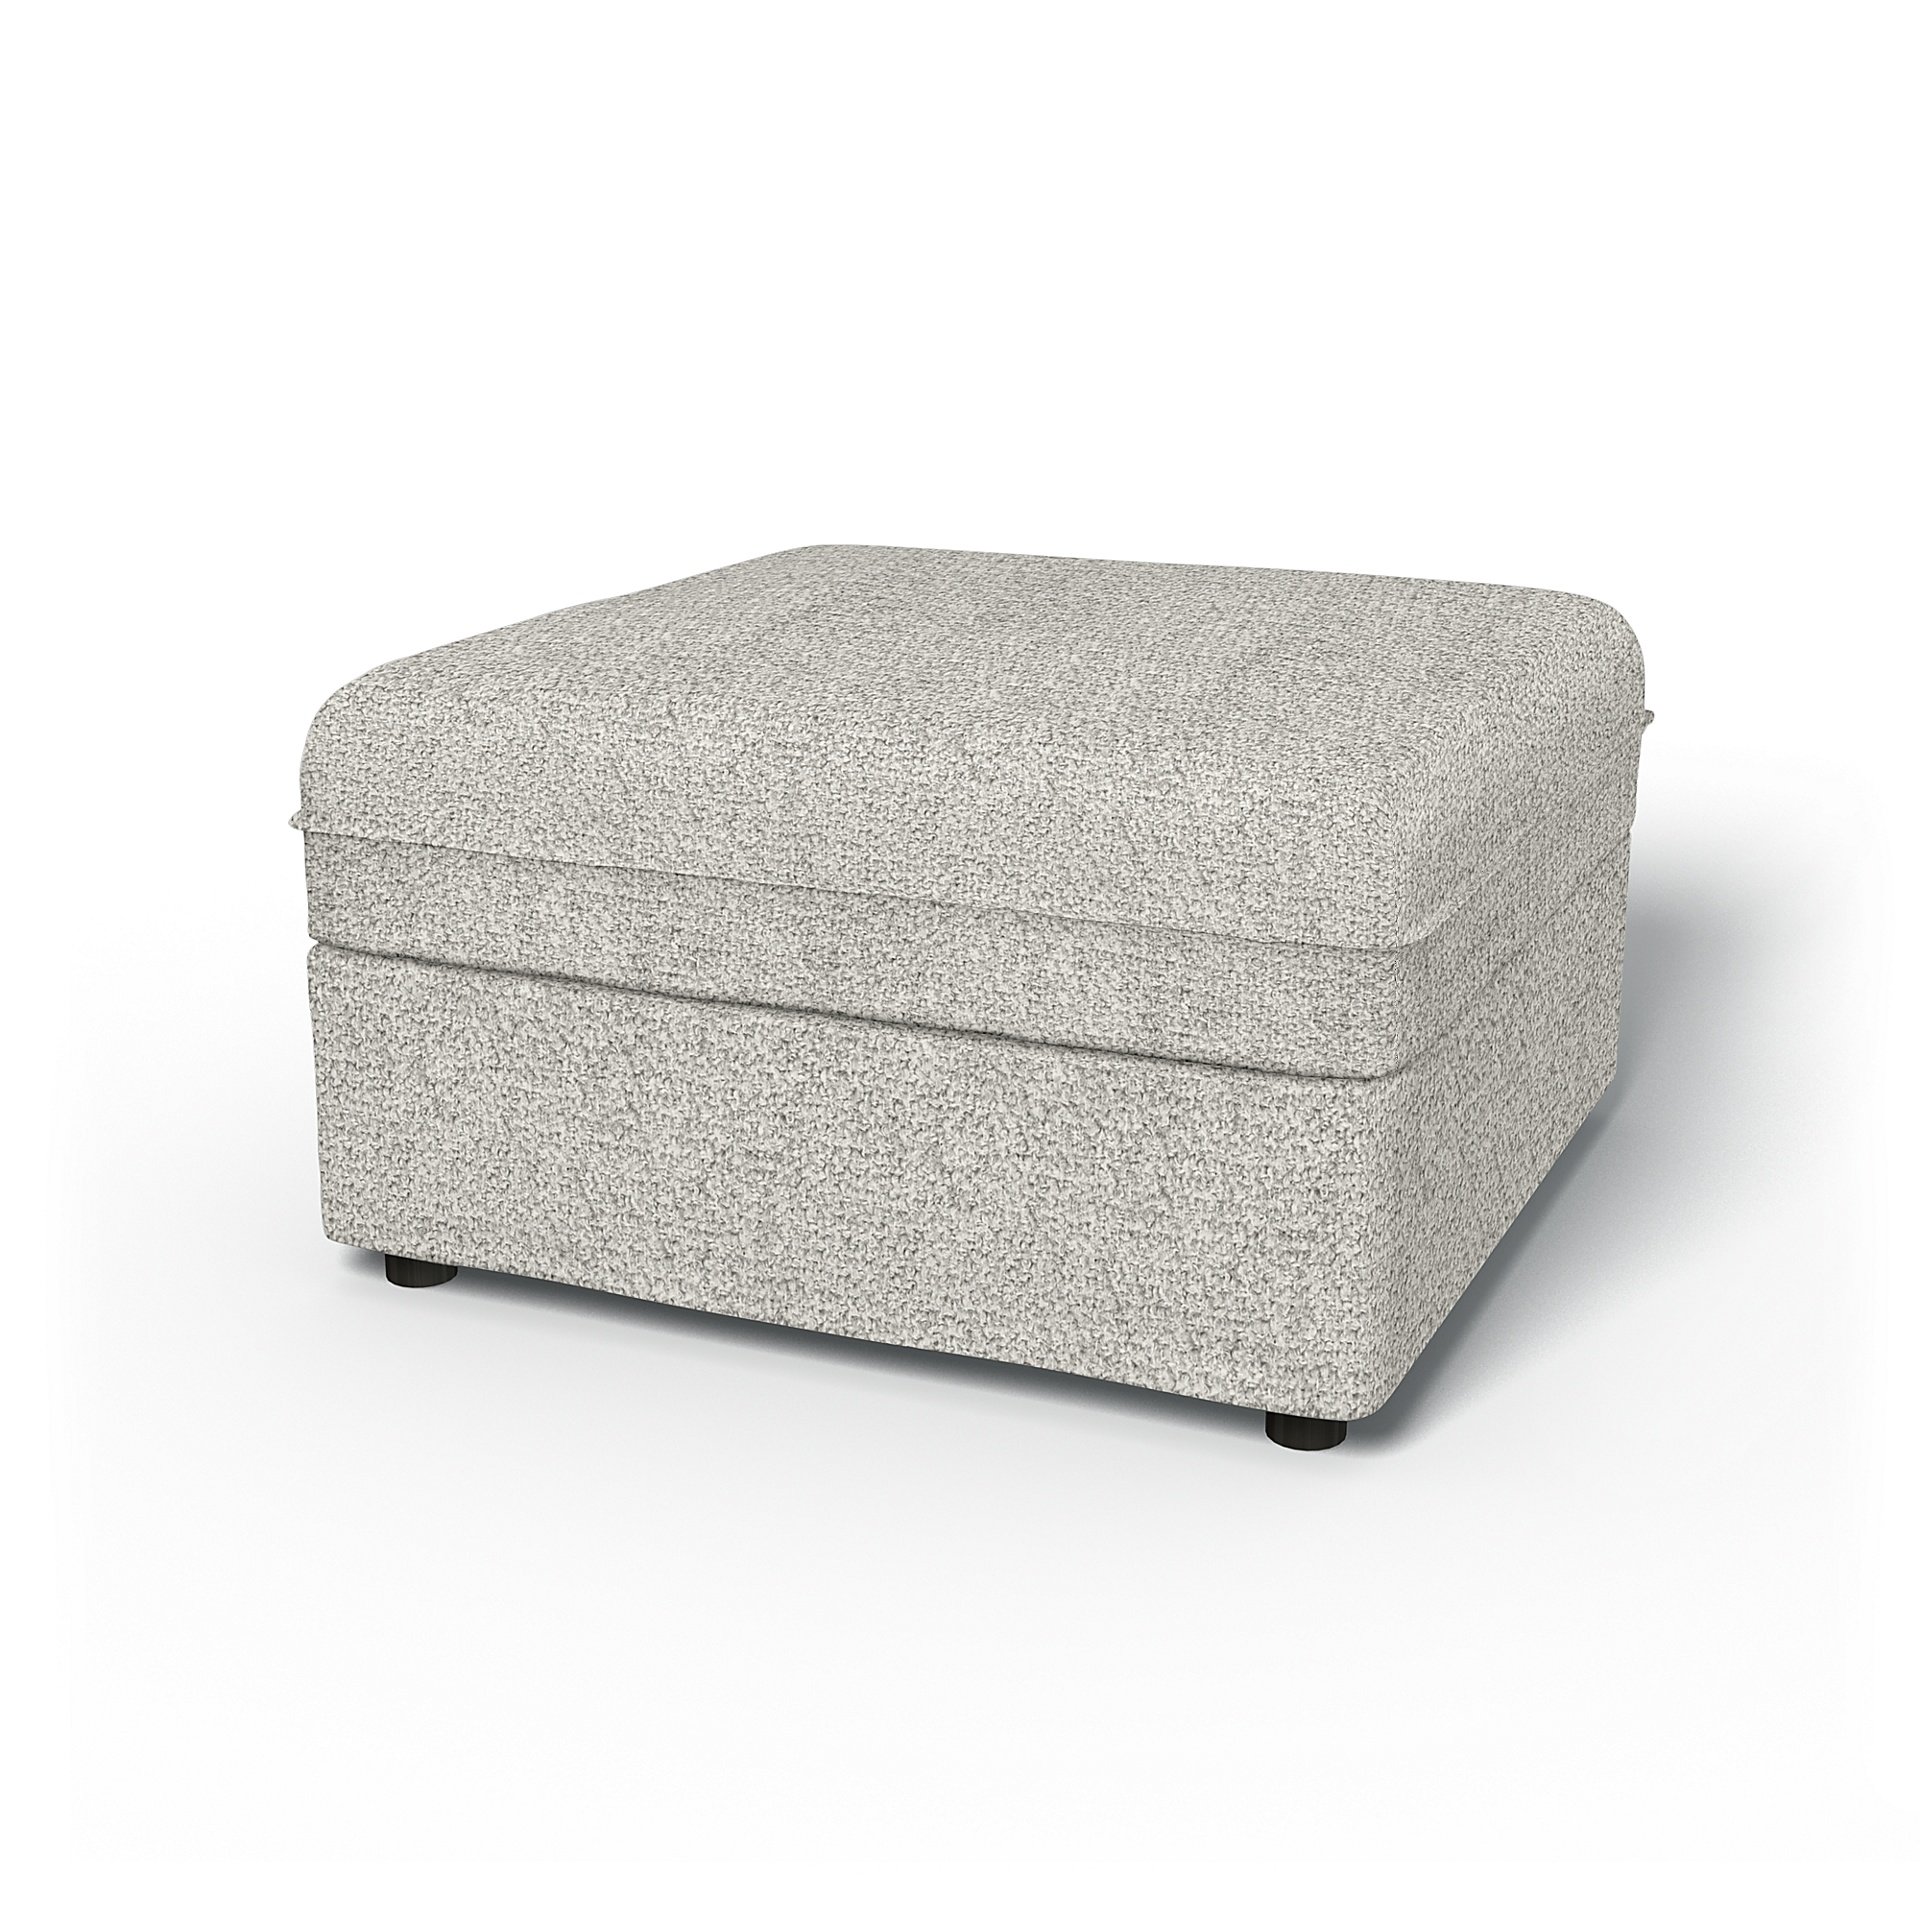 IKEA - Vallentuna Seat Module with Storage Cover 80x80cm 32x32in, Driftwood, Boucle & Texture - Bemz